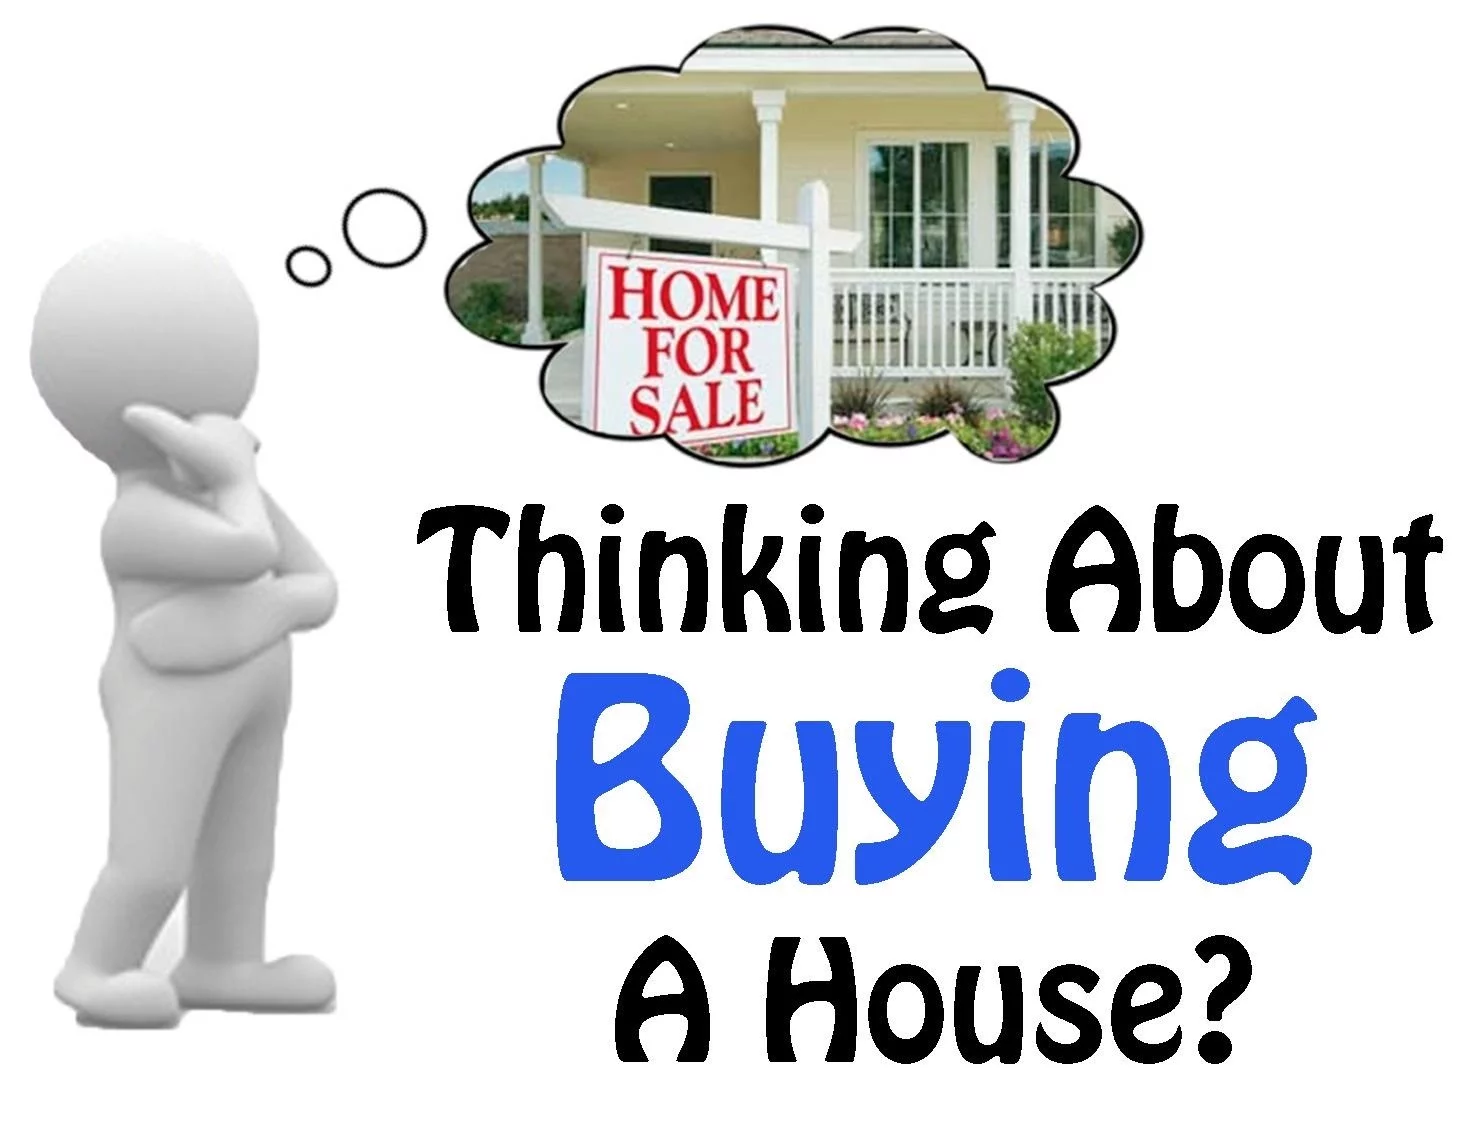 Think-about-buying-a-house.jpg